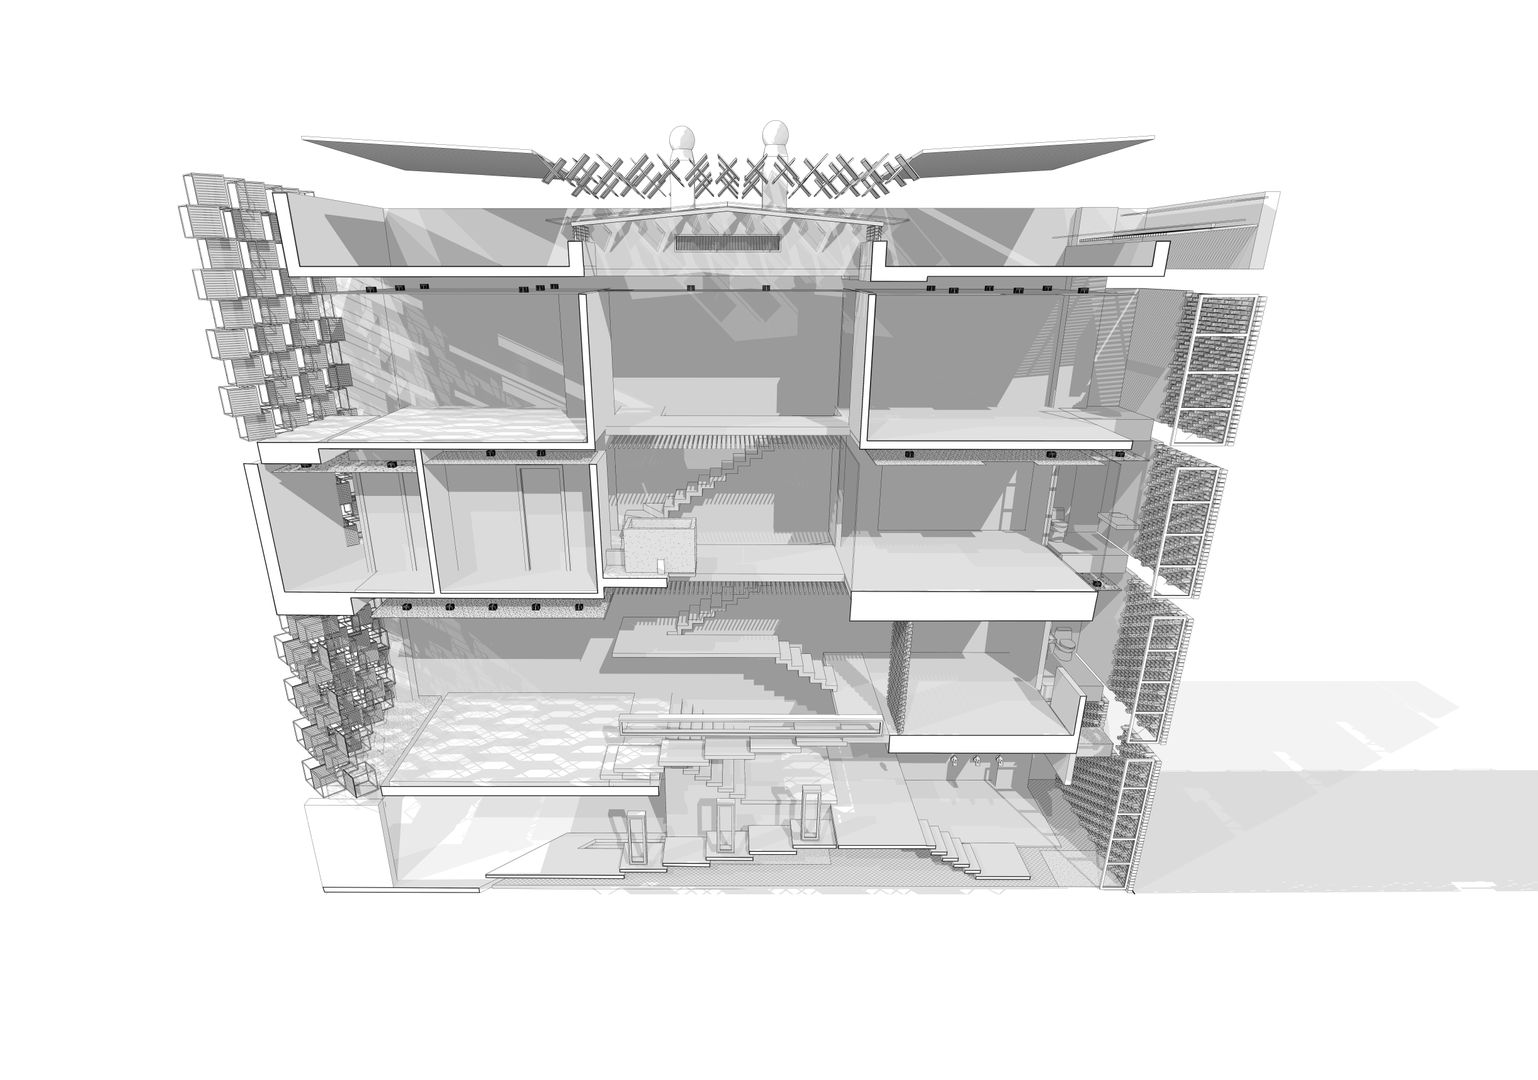 STH - Stairhouse, deline architecture consultancy & construction deline architecture consultancy & construction